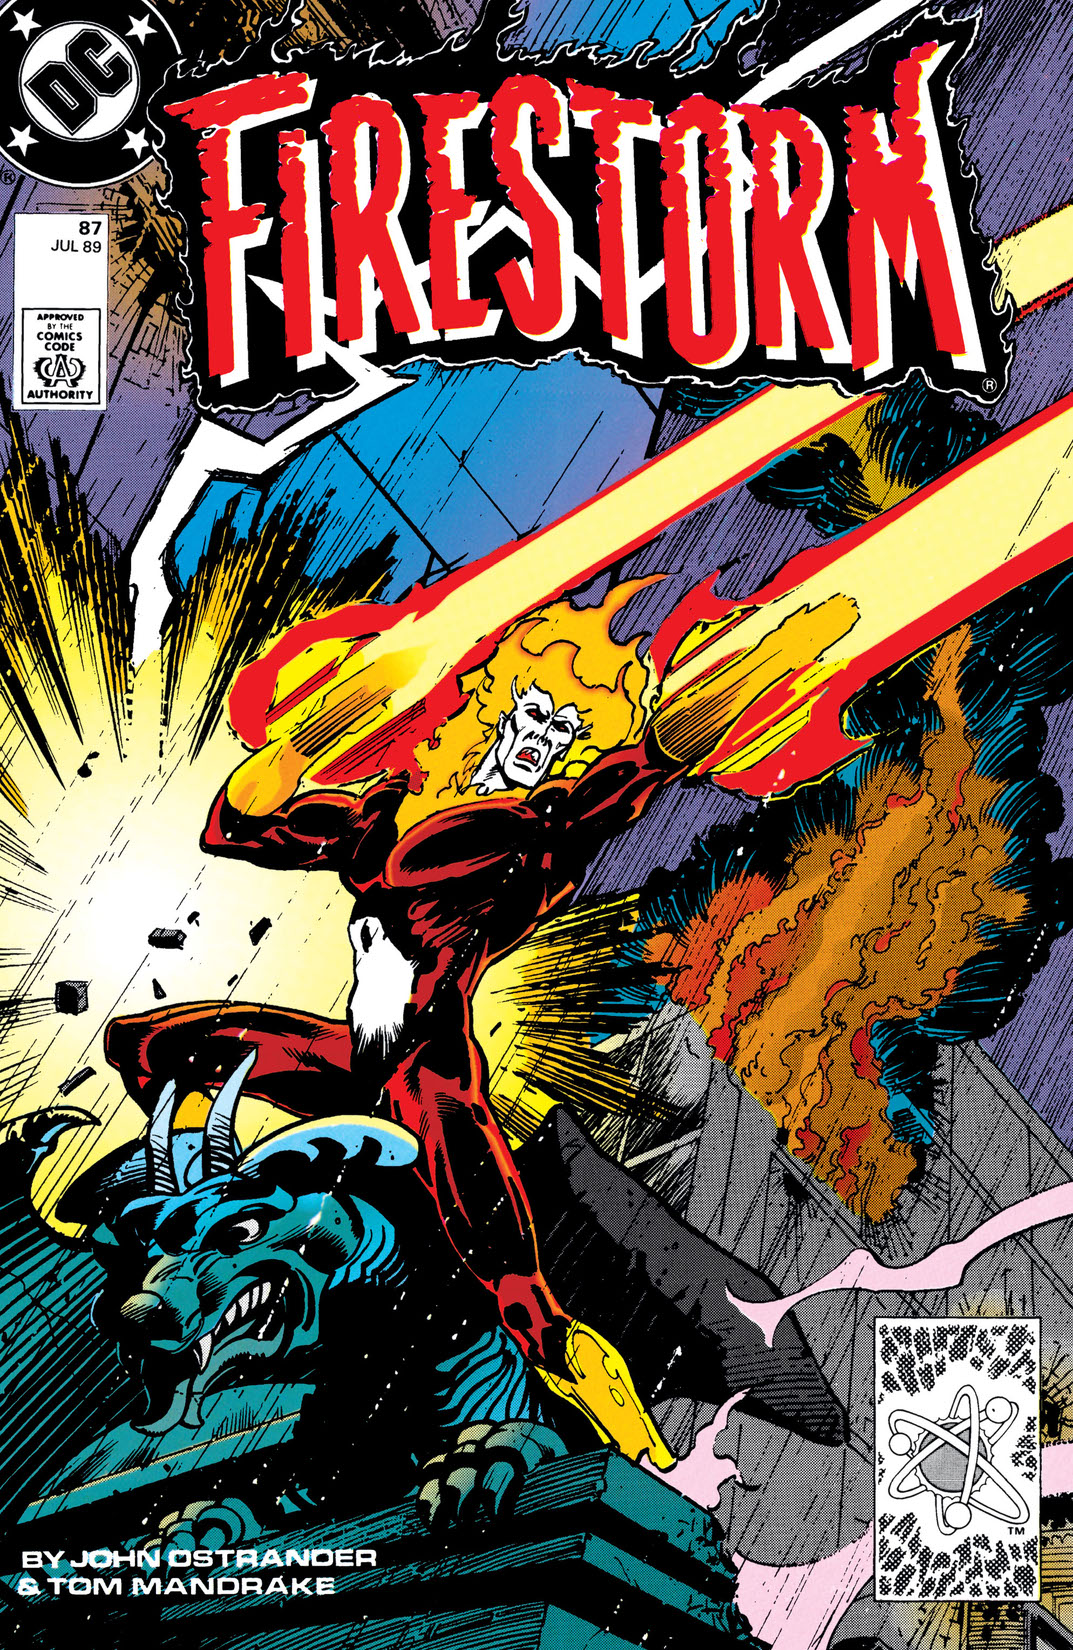 Firestorm: The Nuclear Man #87 preview images